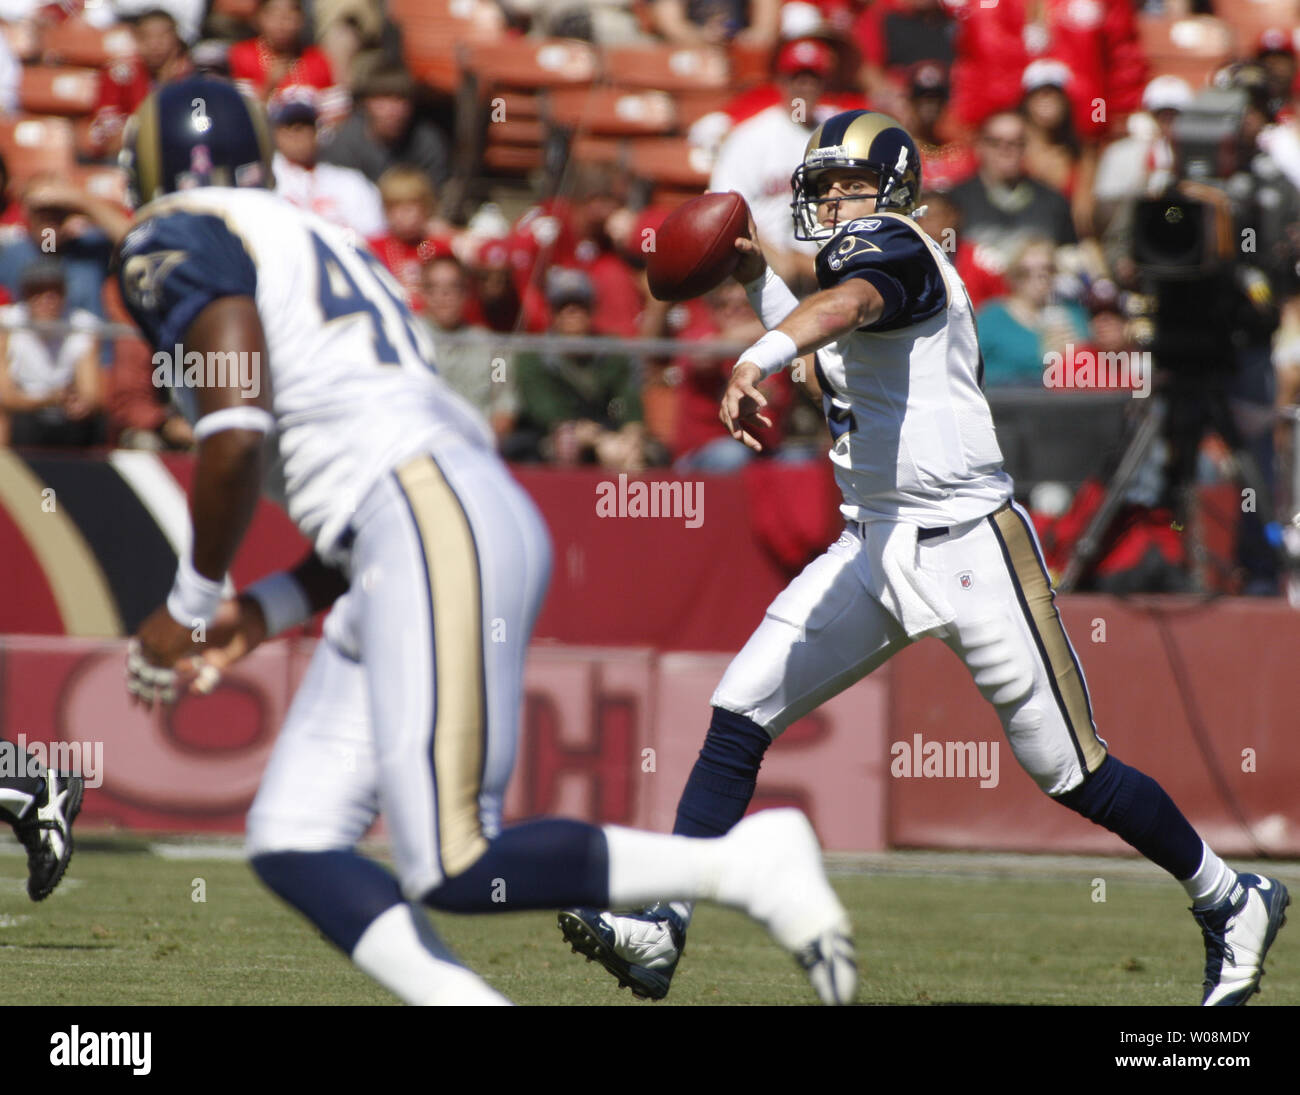 St. Louis Rams QB Kyle Boller (R) throws a first half pass to TE Daniel Fells  in the first half against the San Francisco 49ers at Candlestick Park in San Francisco on October 4, 2009. The 49ers defeated the Rams 35-0.    UPI/Terry Schmitt Stock Photo